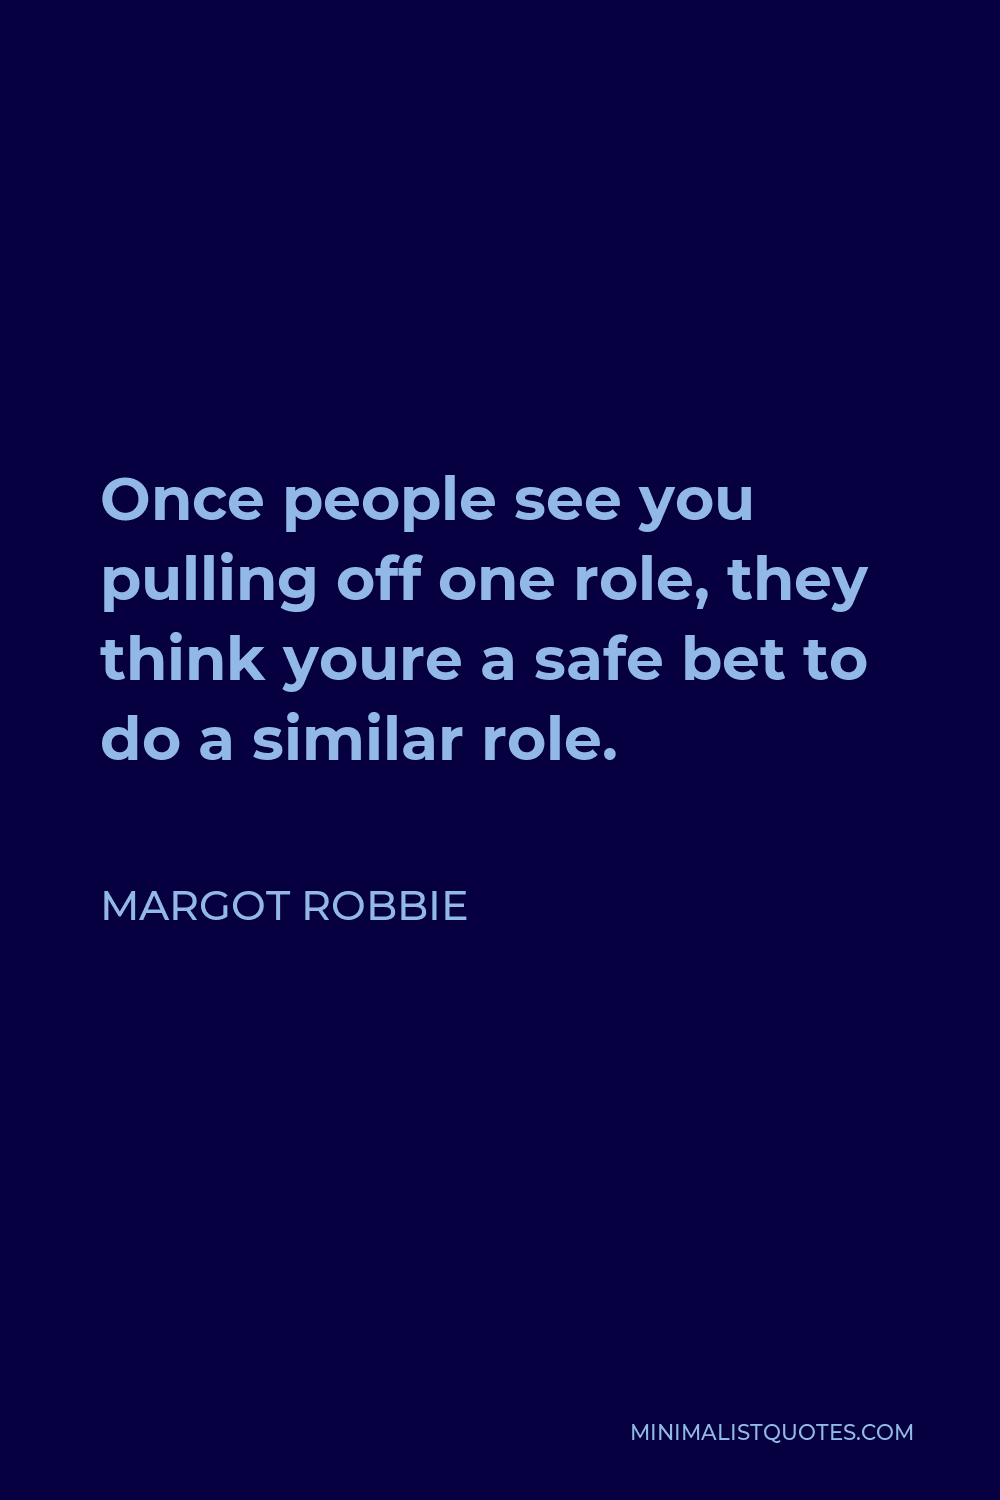 Margot Robbie Quote - Once people see you pulling off one role, they think youre a safe bet to do a similar role.